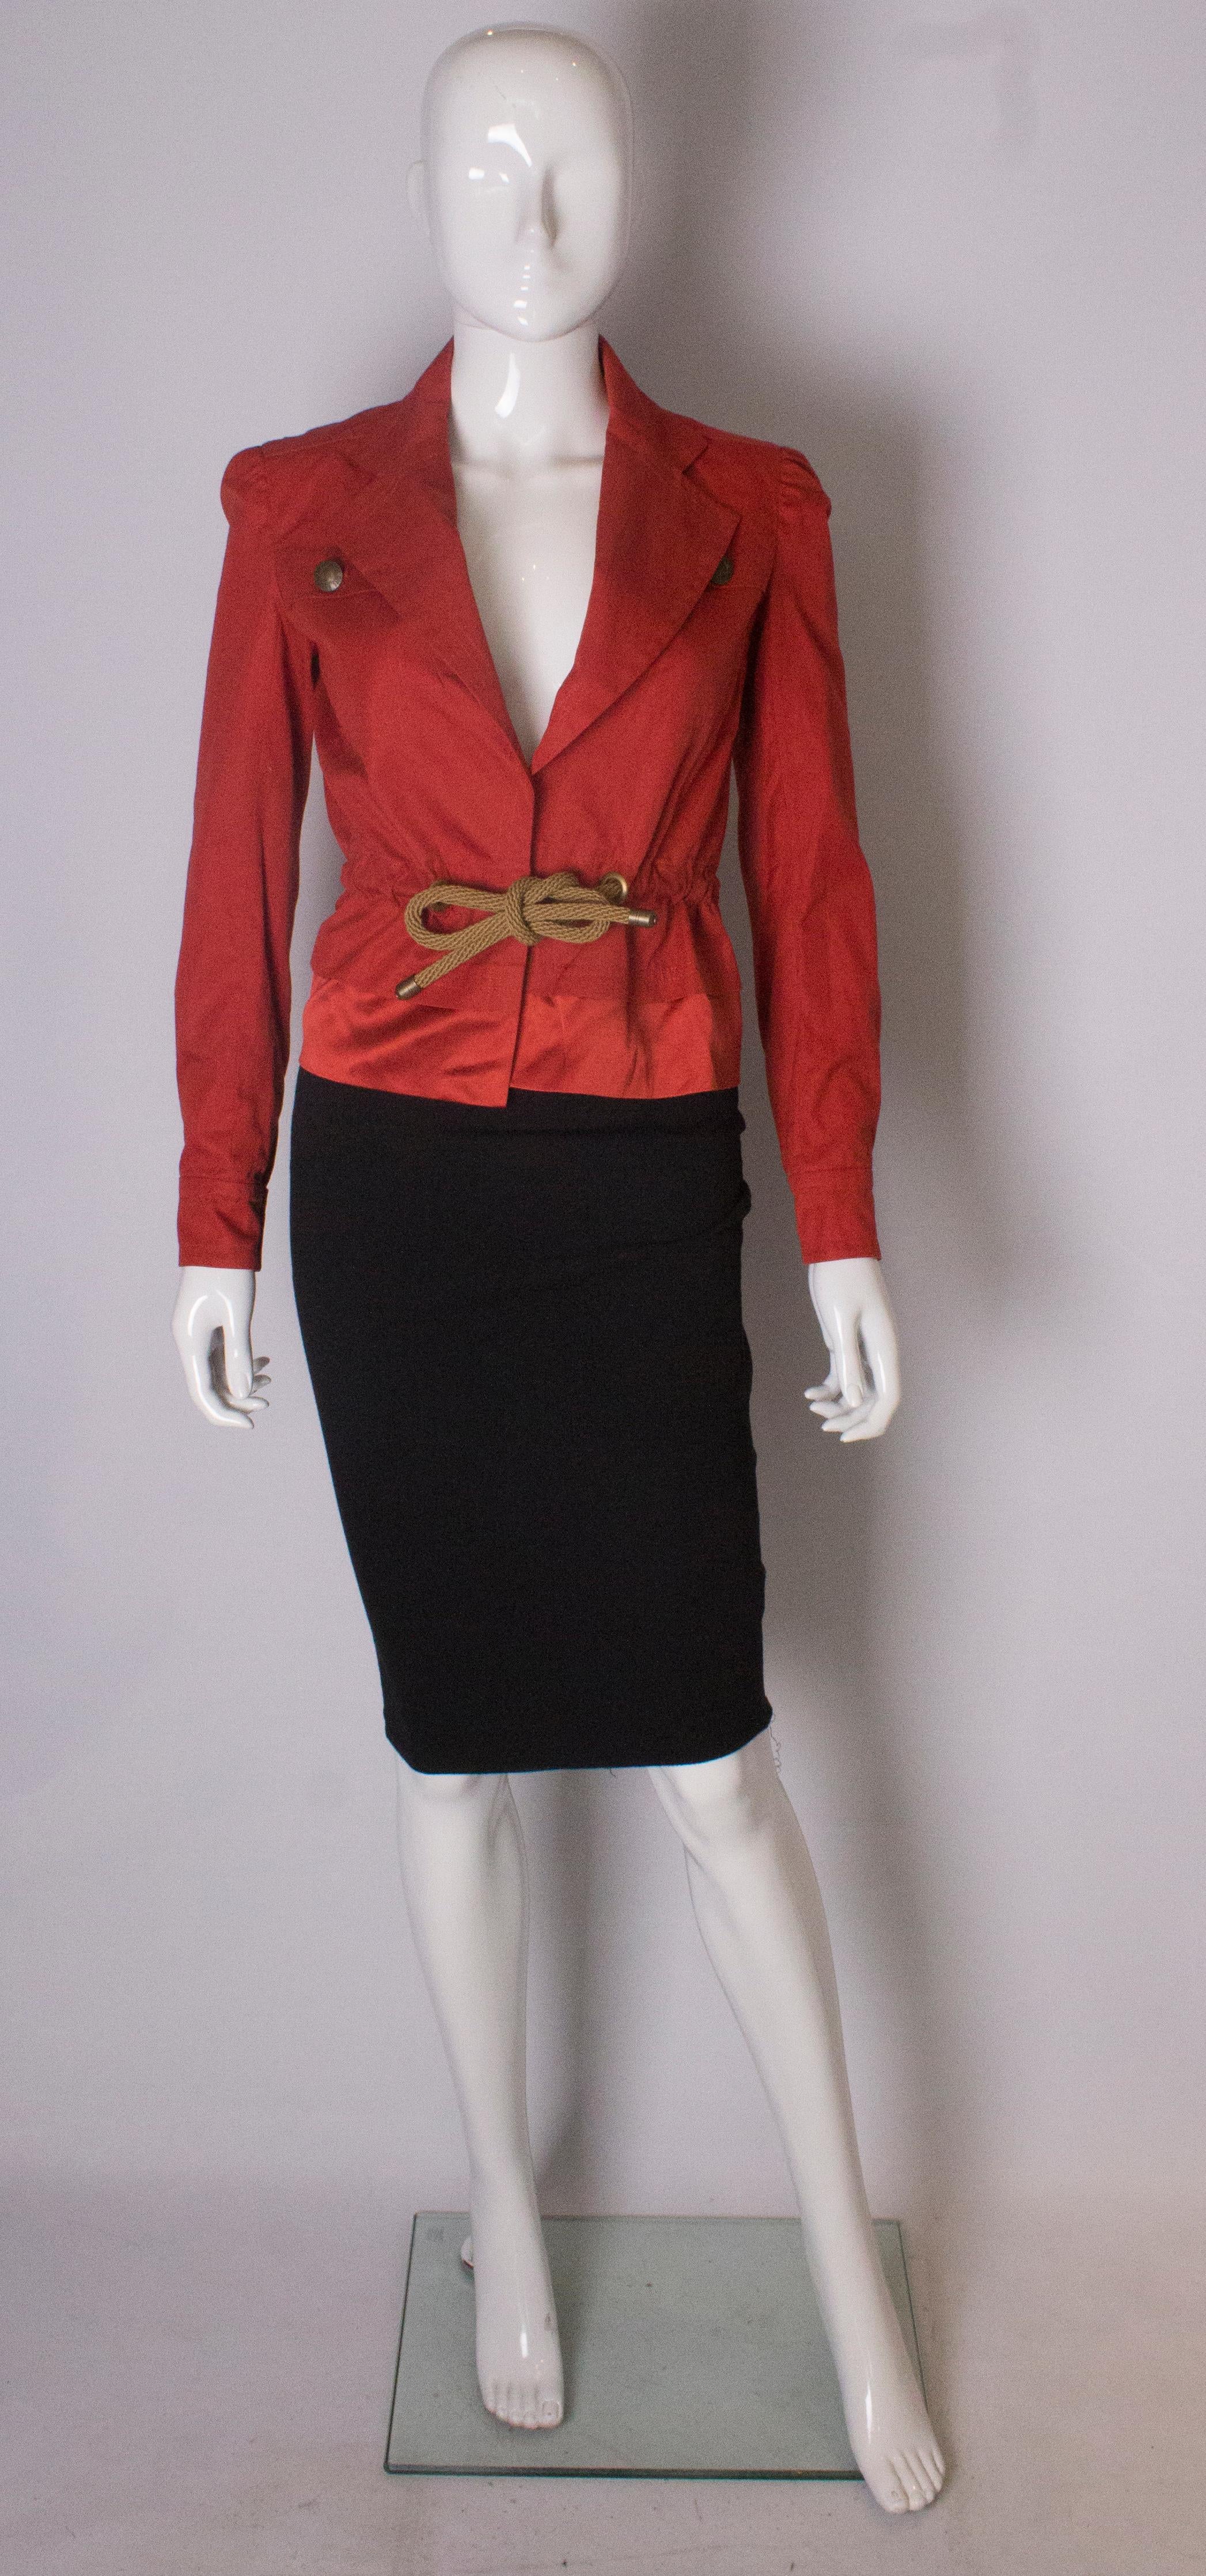 A chic vintage jacket from Yves Saint Laurent , Rive Gauche line. The jacket is in red cotton with an unusual rope drawstring waist, and silk like panel at the base. It has 2 breast pockets and single button cuffs.